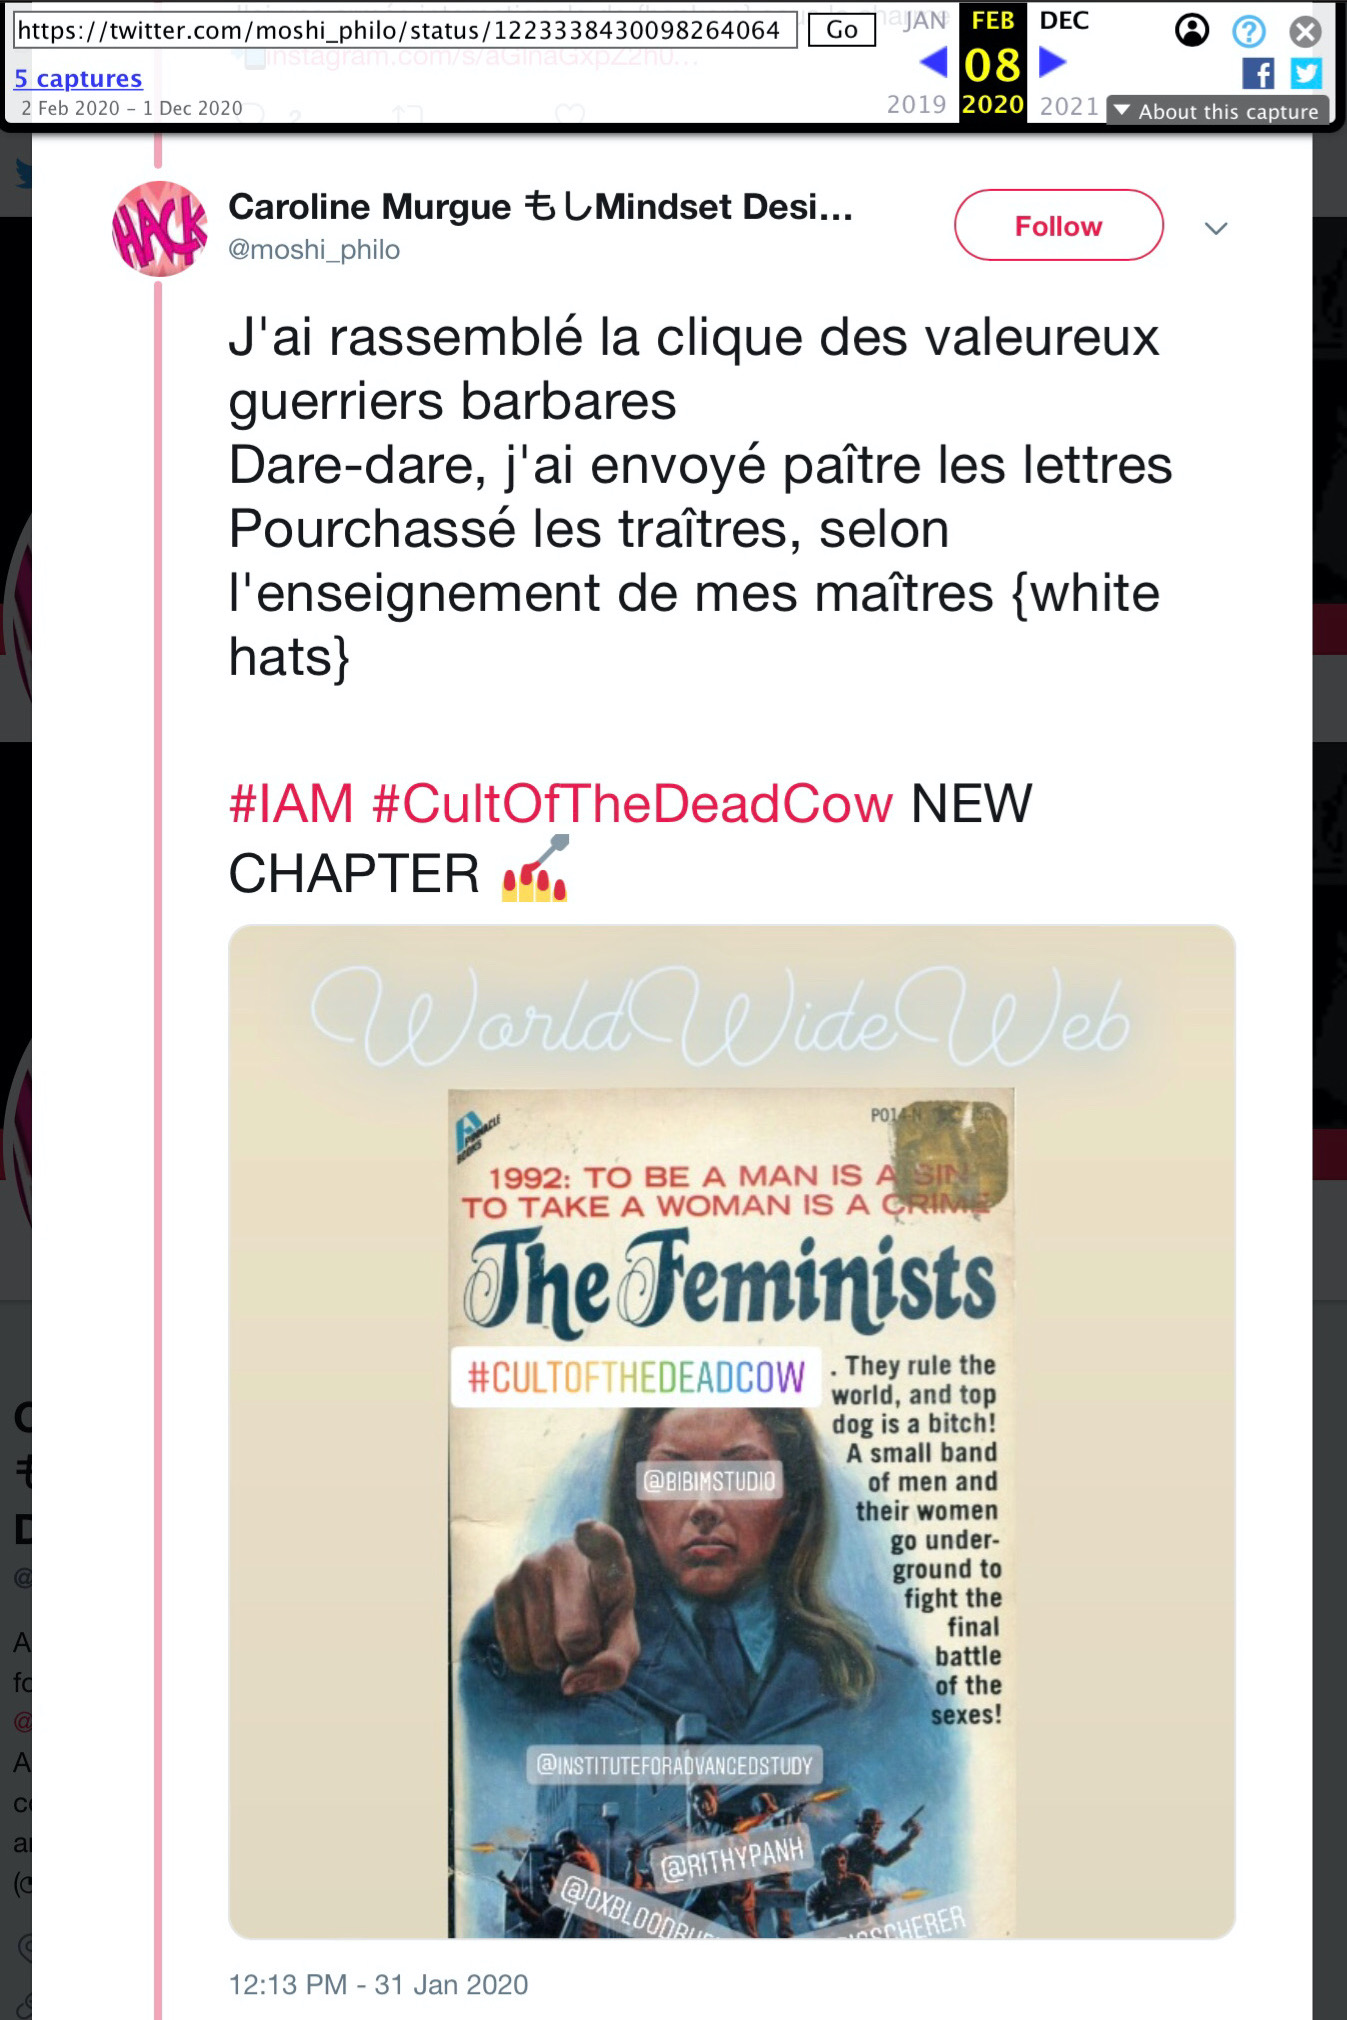 31 Jan 2020 tweet from @moshi_philo: [French text redacted] #IAM #CultOfTheDeadCow NEW CHAPTER